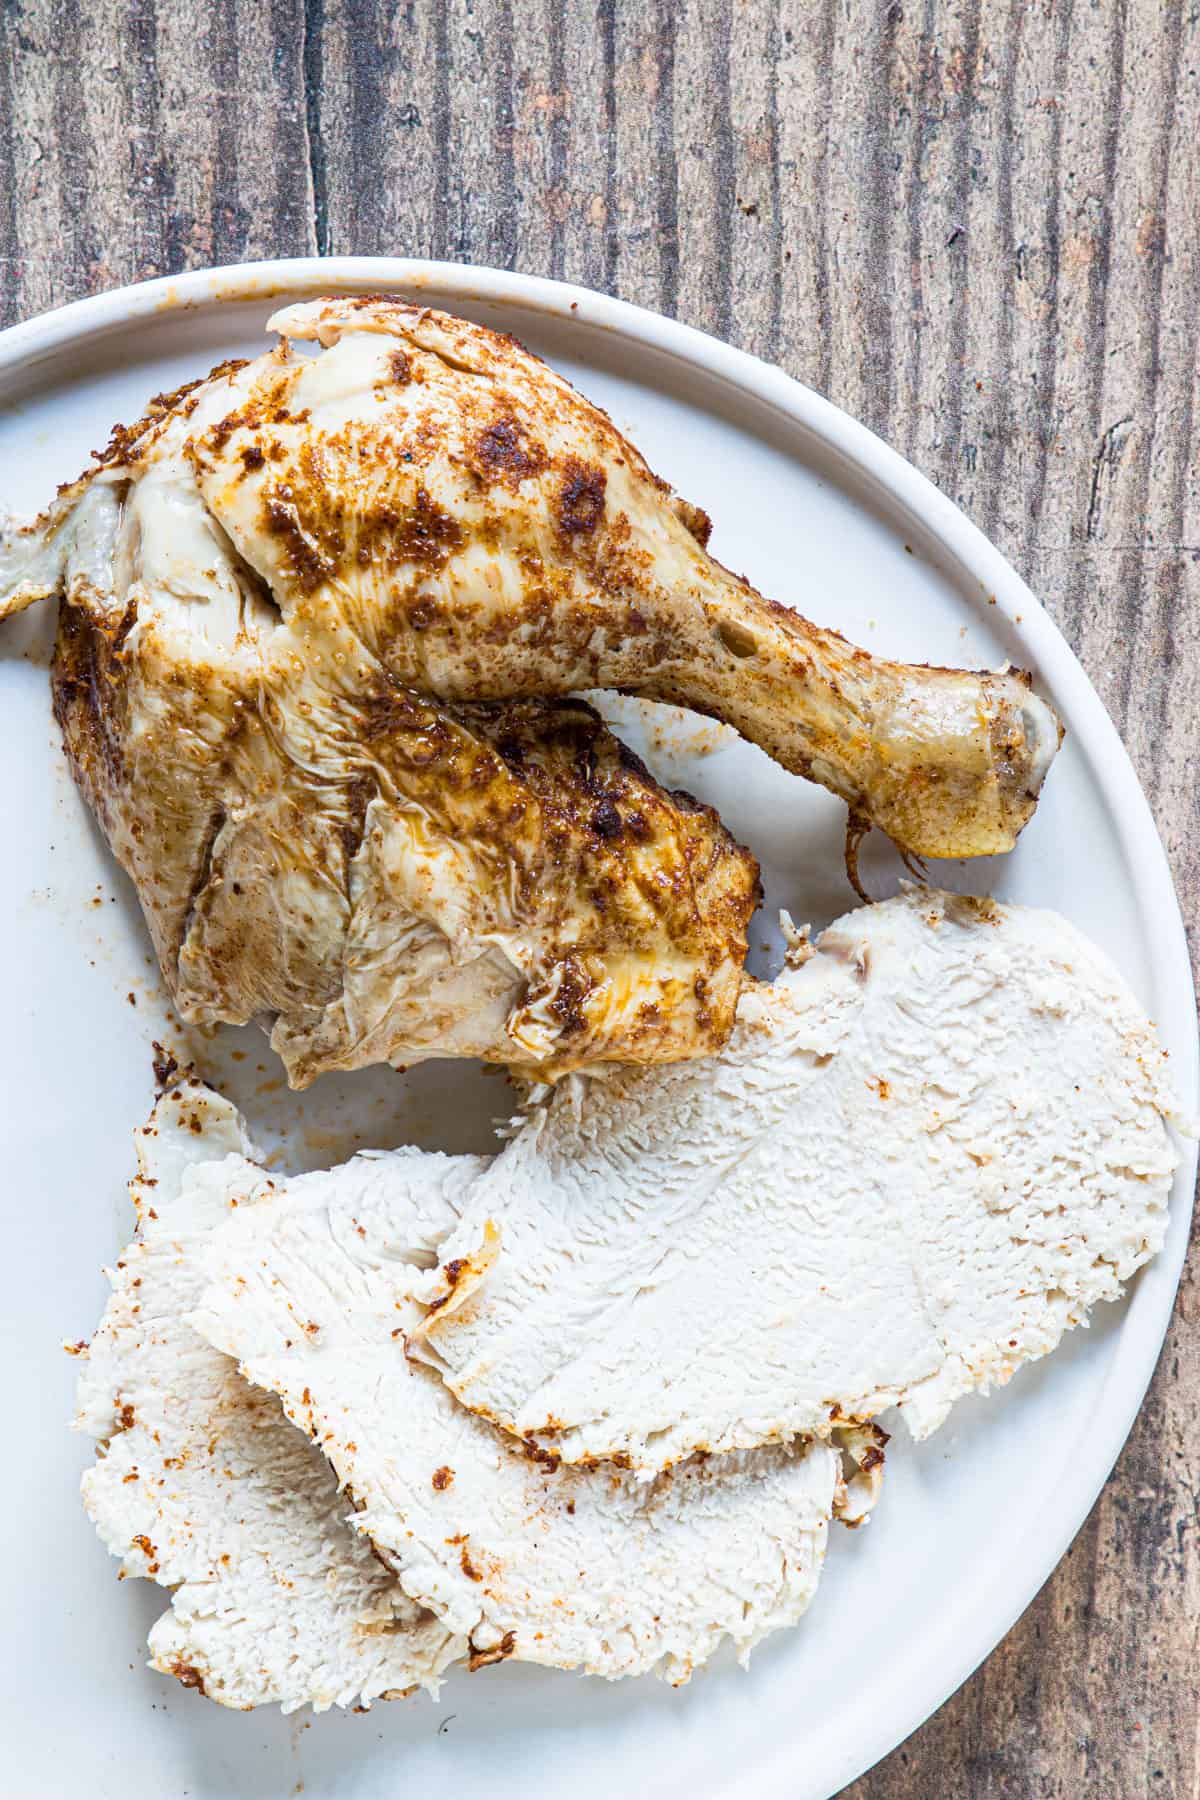 cooked whole chicken sliced and ready to serve on a white plate